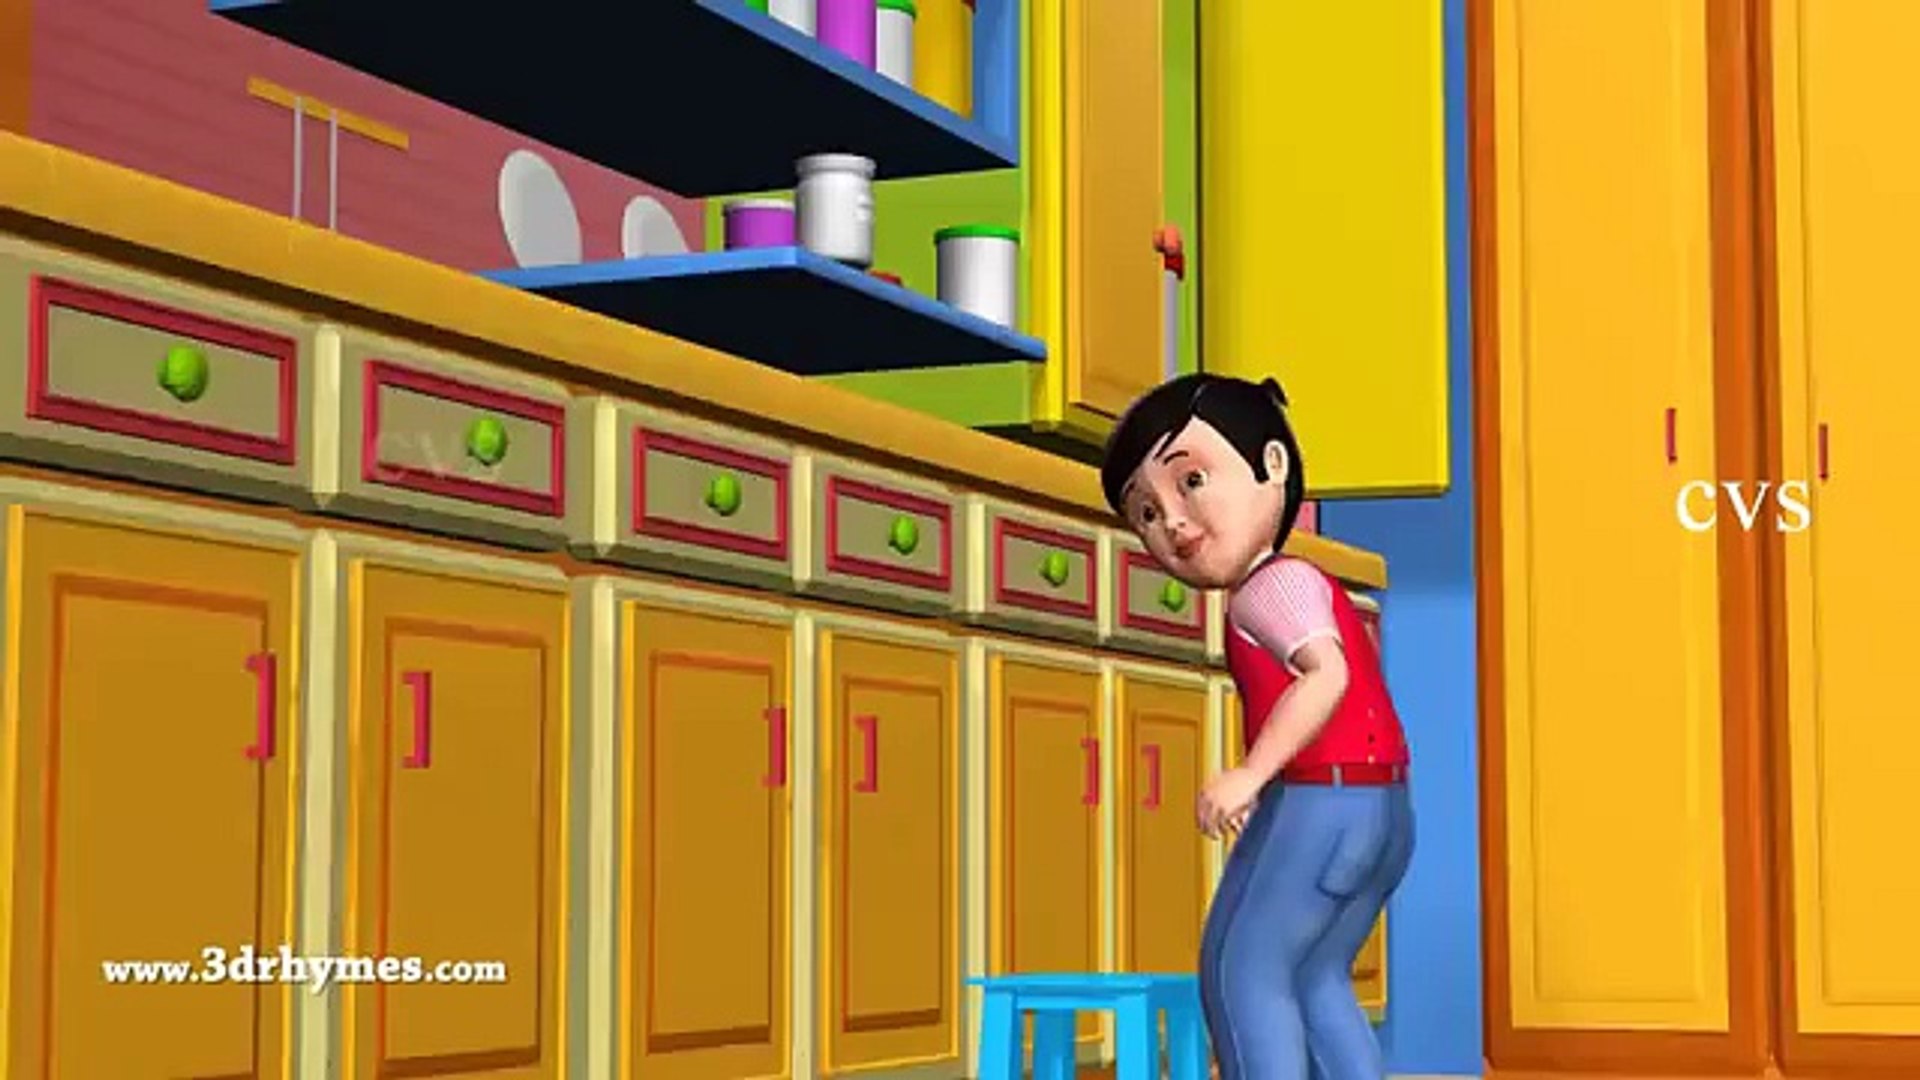 Johny Johny Yes Papa Nursery Rhyme Kids Songs 3D Animation English Rhymes  For Children 36 - Dailymotion Video